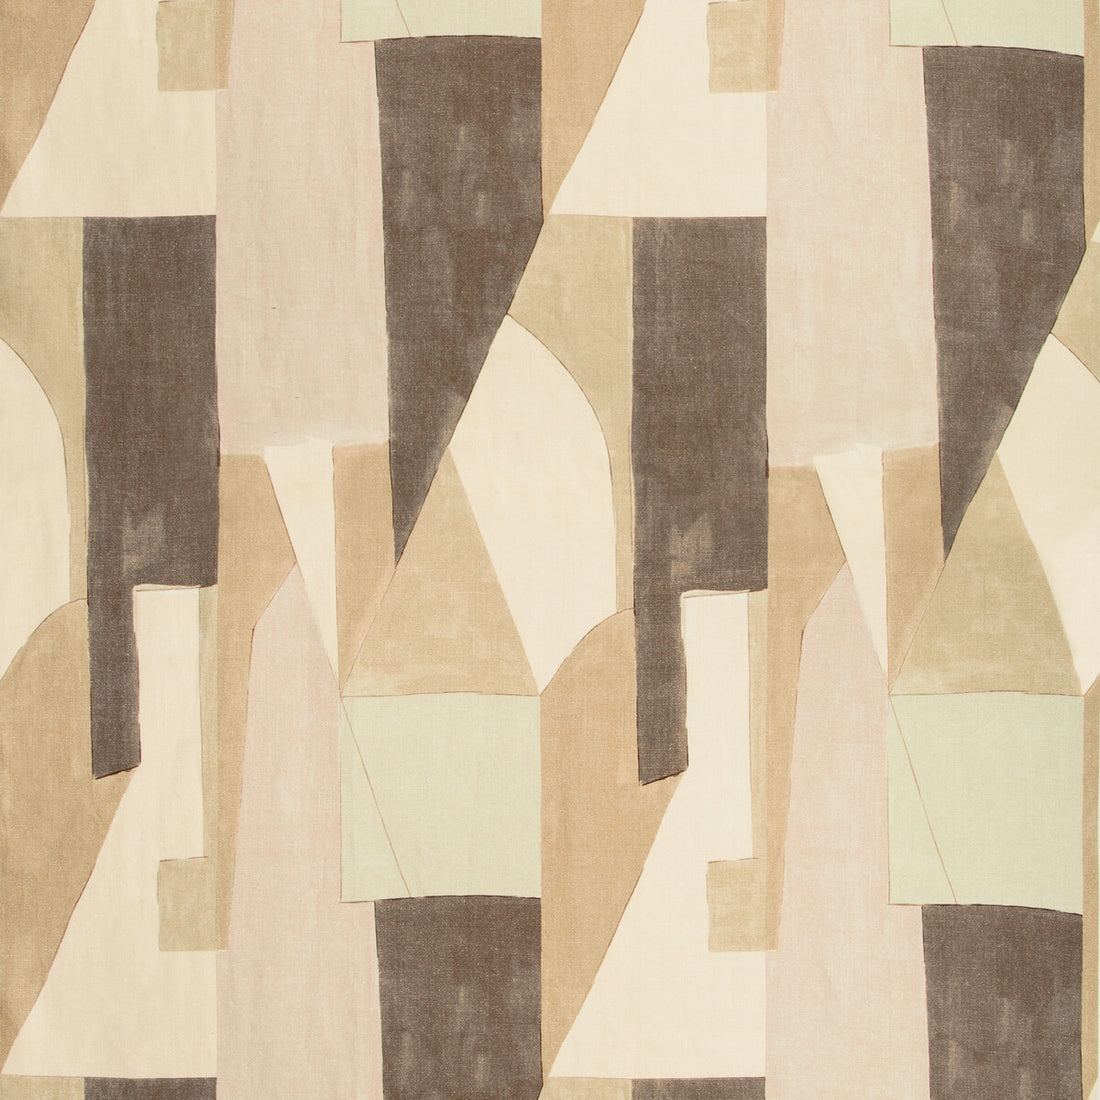 District fabric in silt color - pattern GWF-3752.167.0 - by Lee Jofa Modern in the Kelly Wearstler V collection